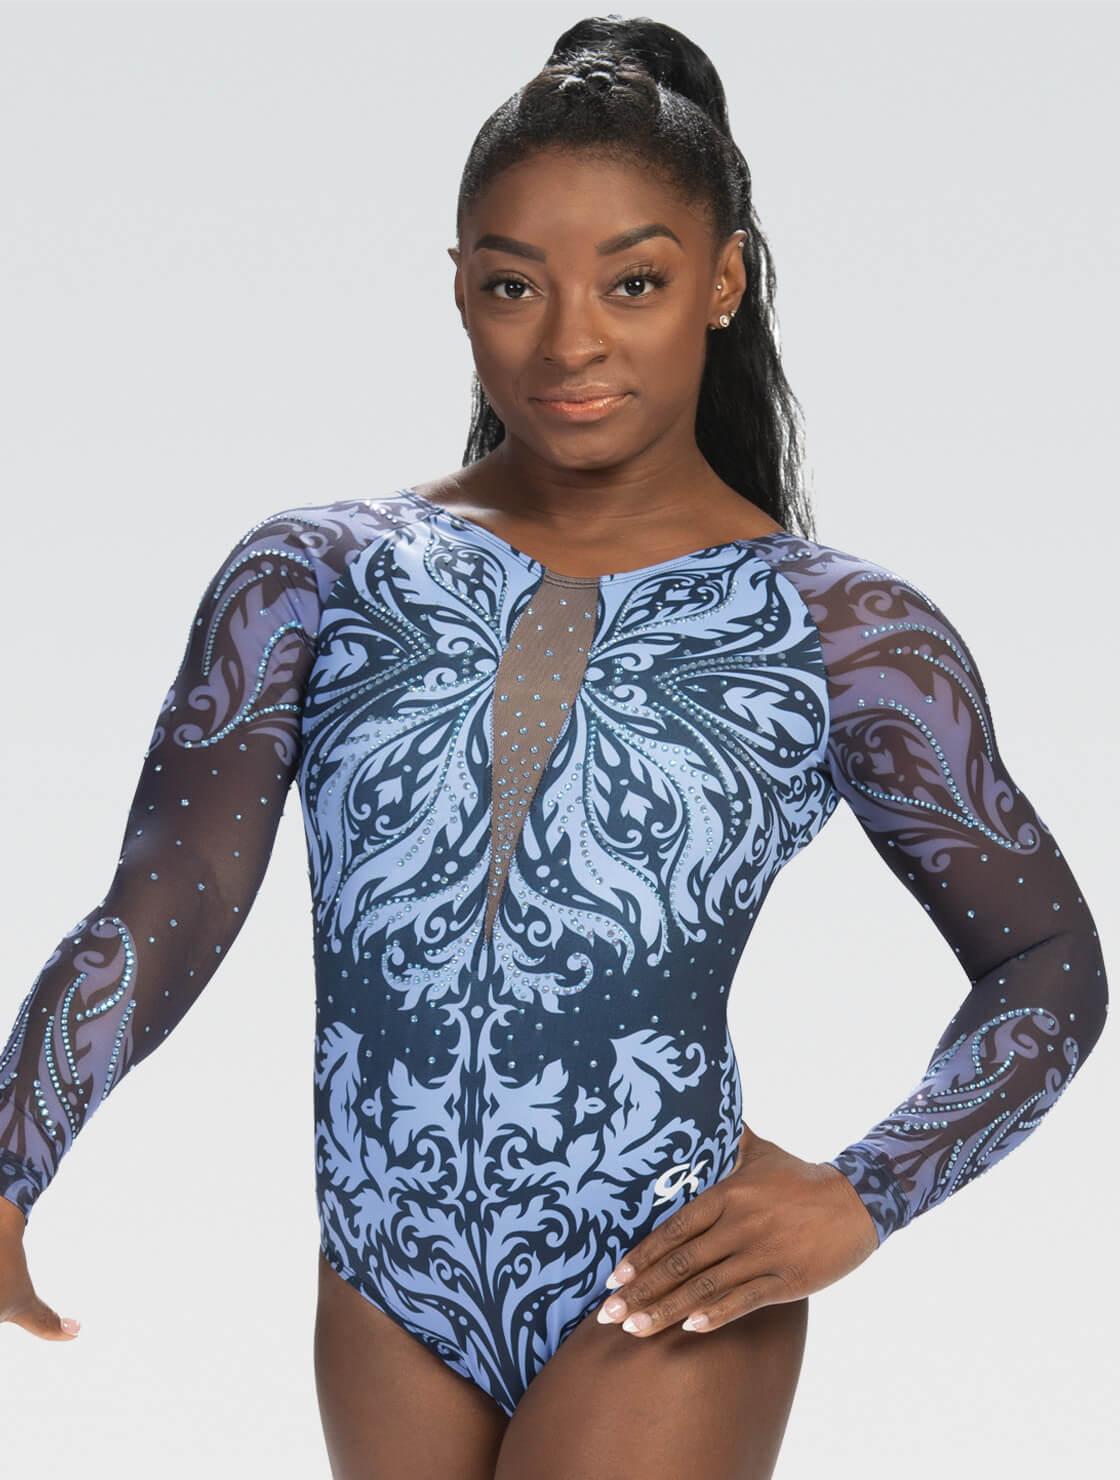 Cleopatra Competition Leotard